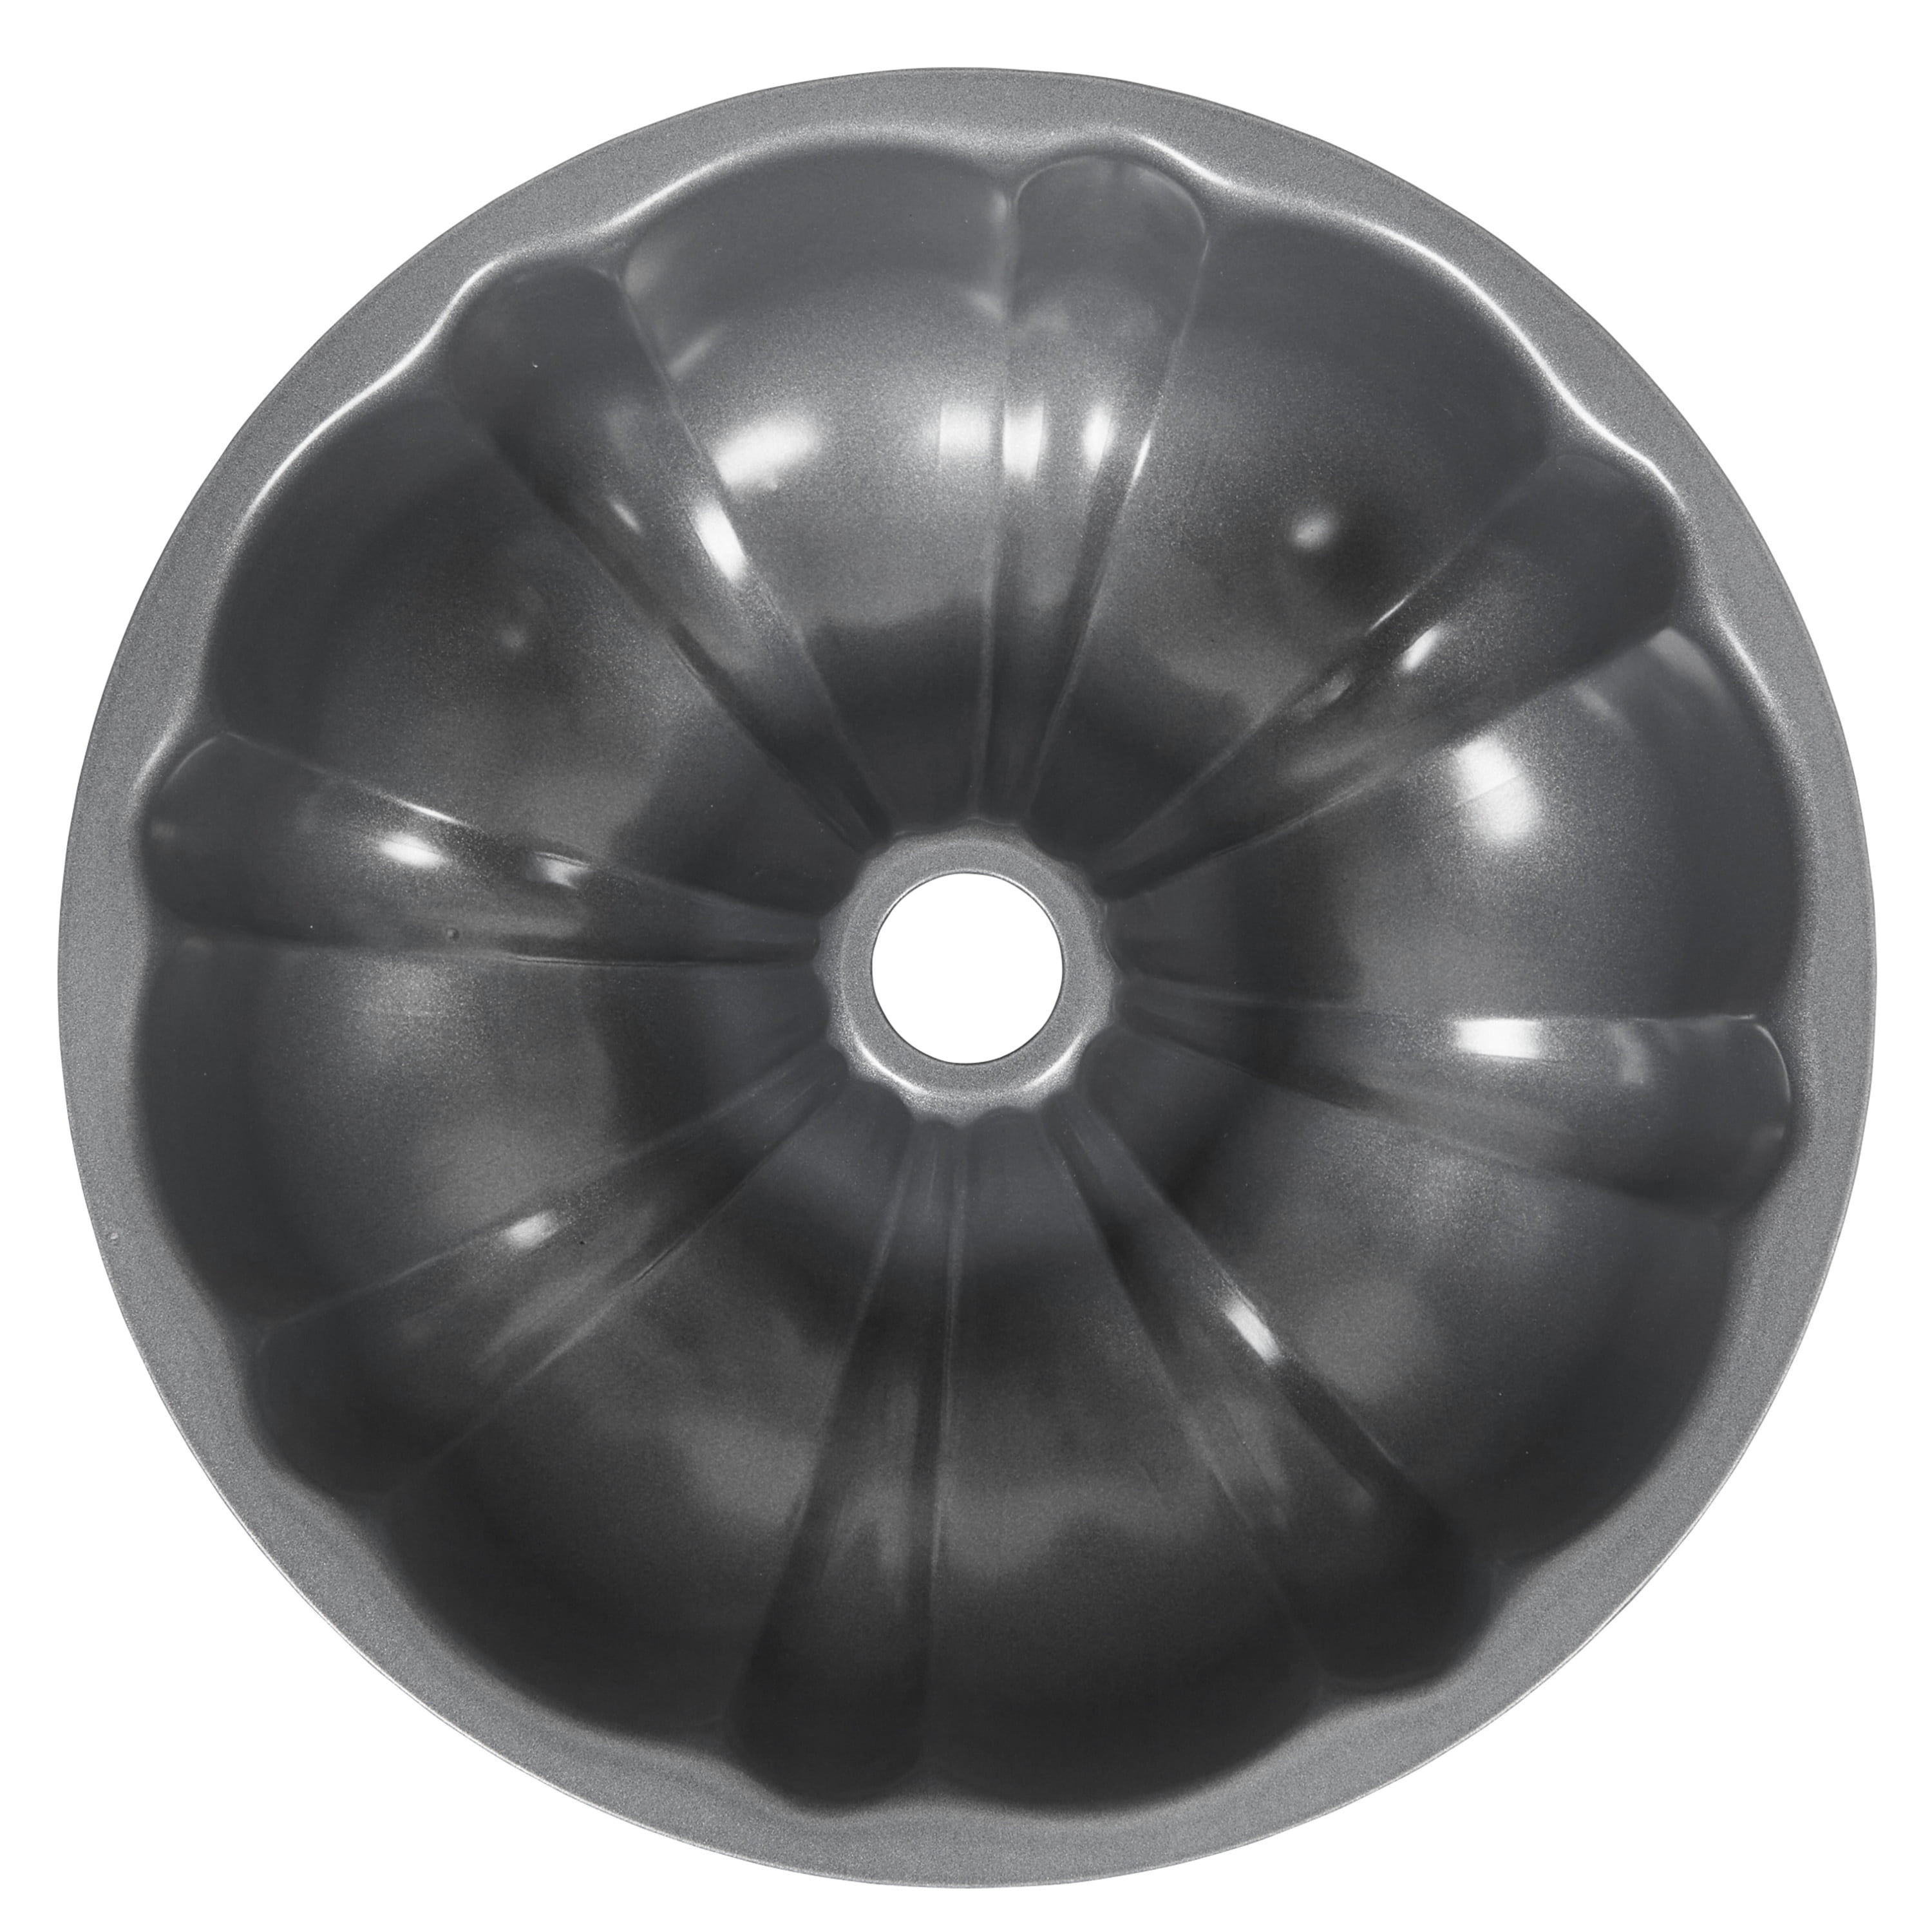 Wilton Bake it Simply Non-Stick Fluted Tube Cake Pan, 9.51-Inch